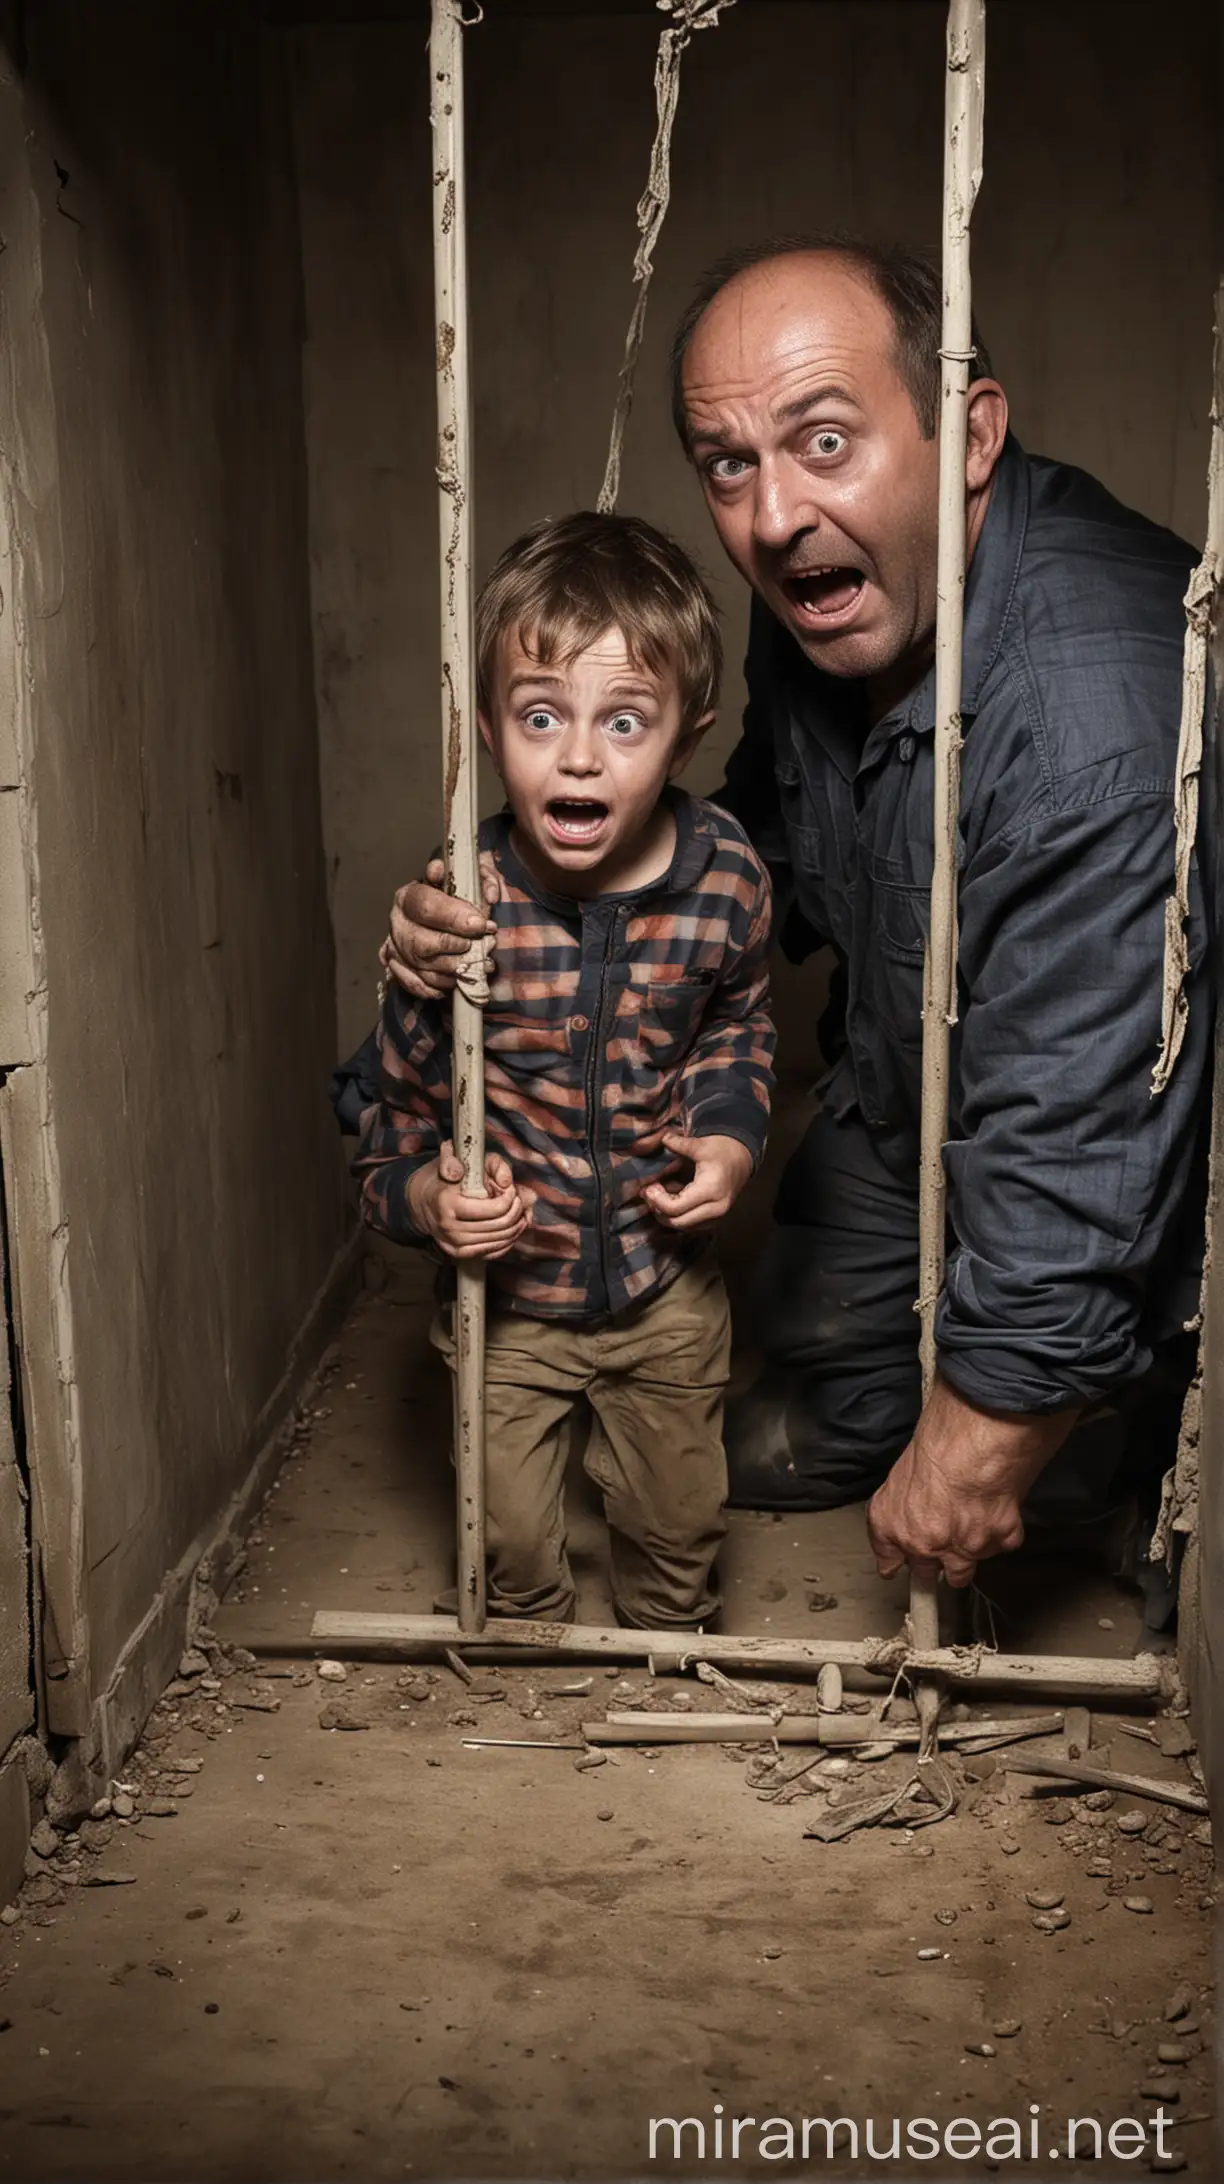 Frightened Child Trapped in Basement by Sinister Figure